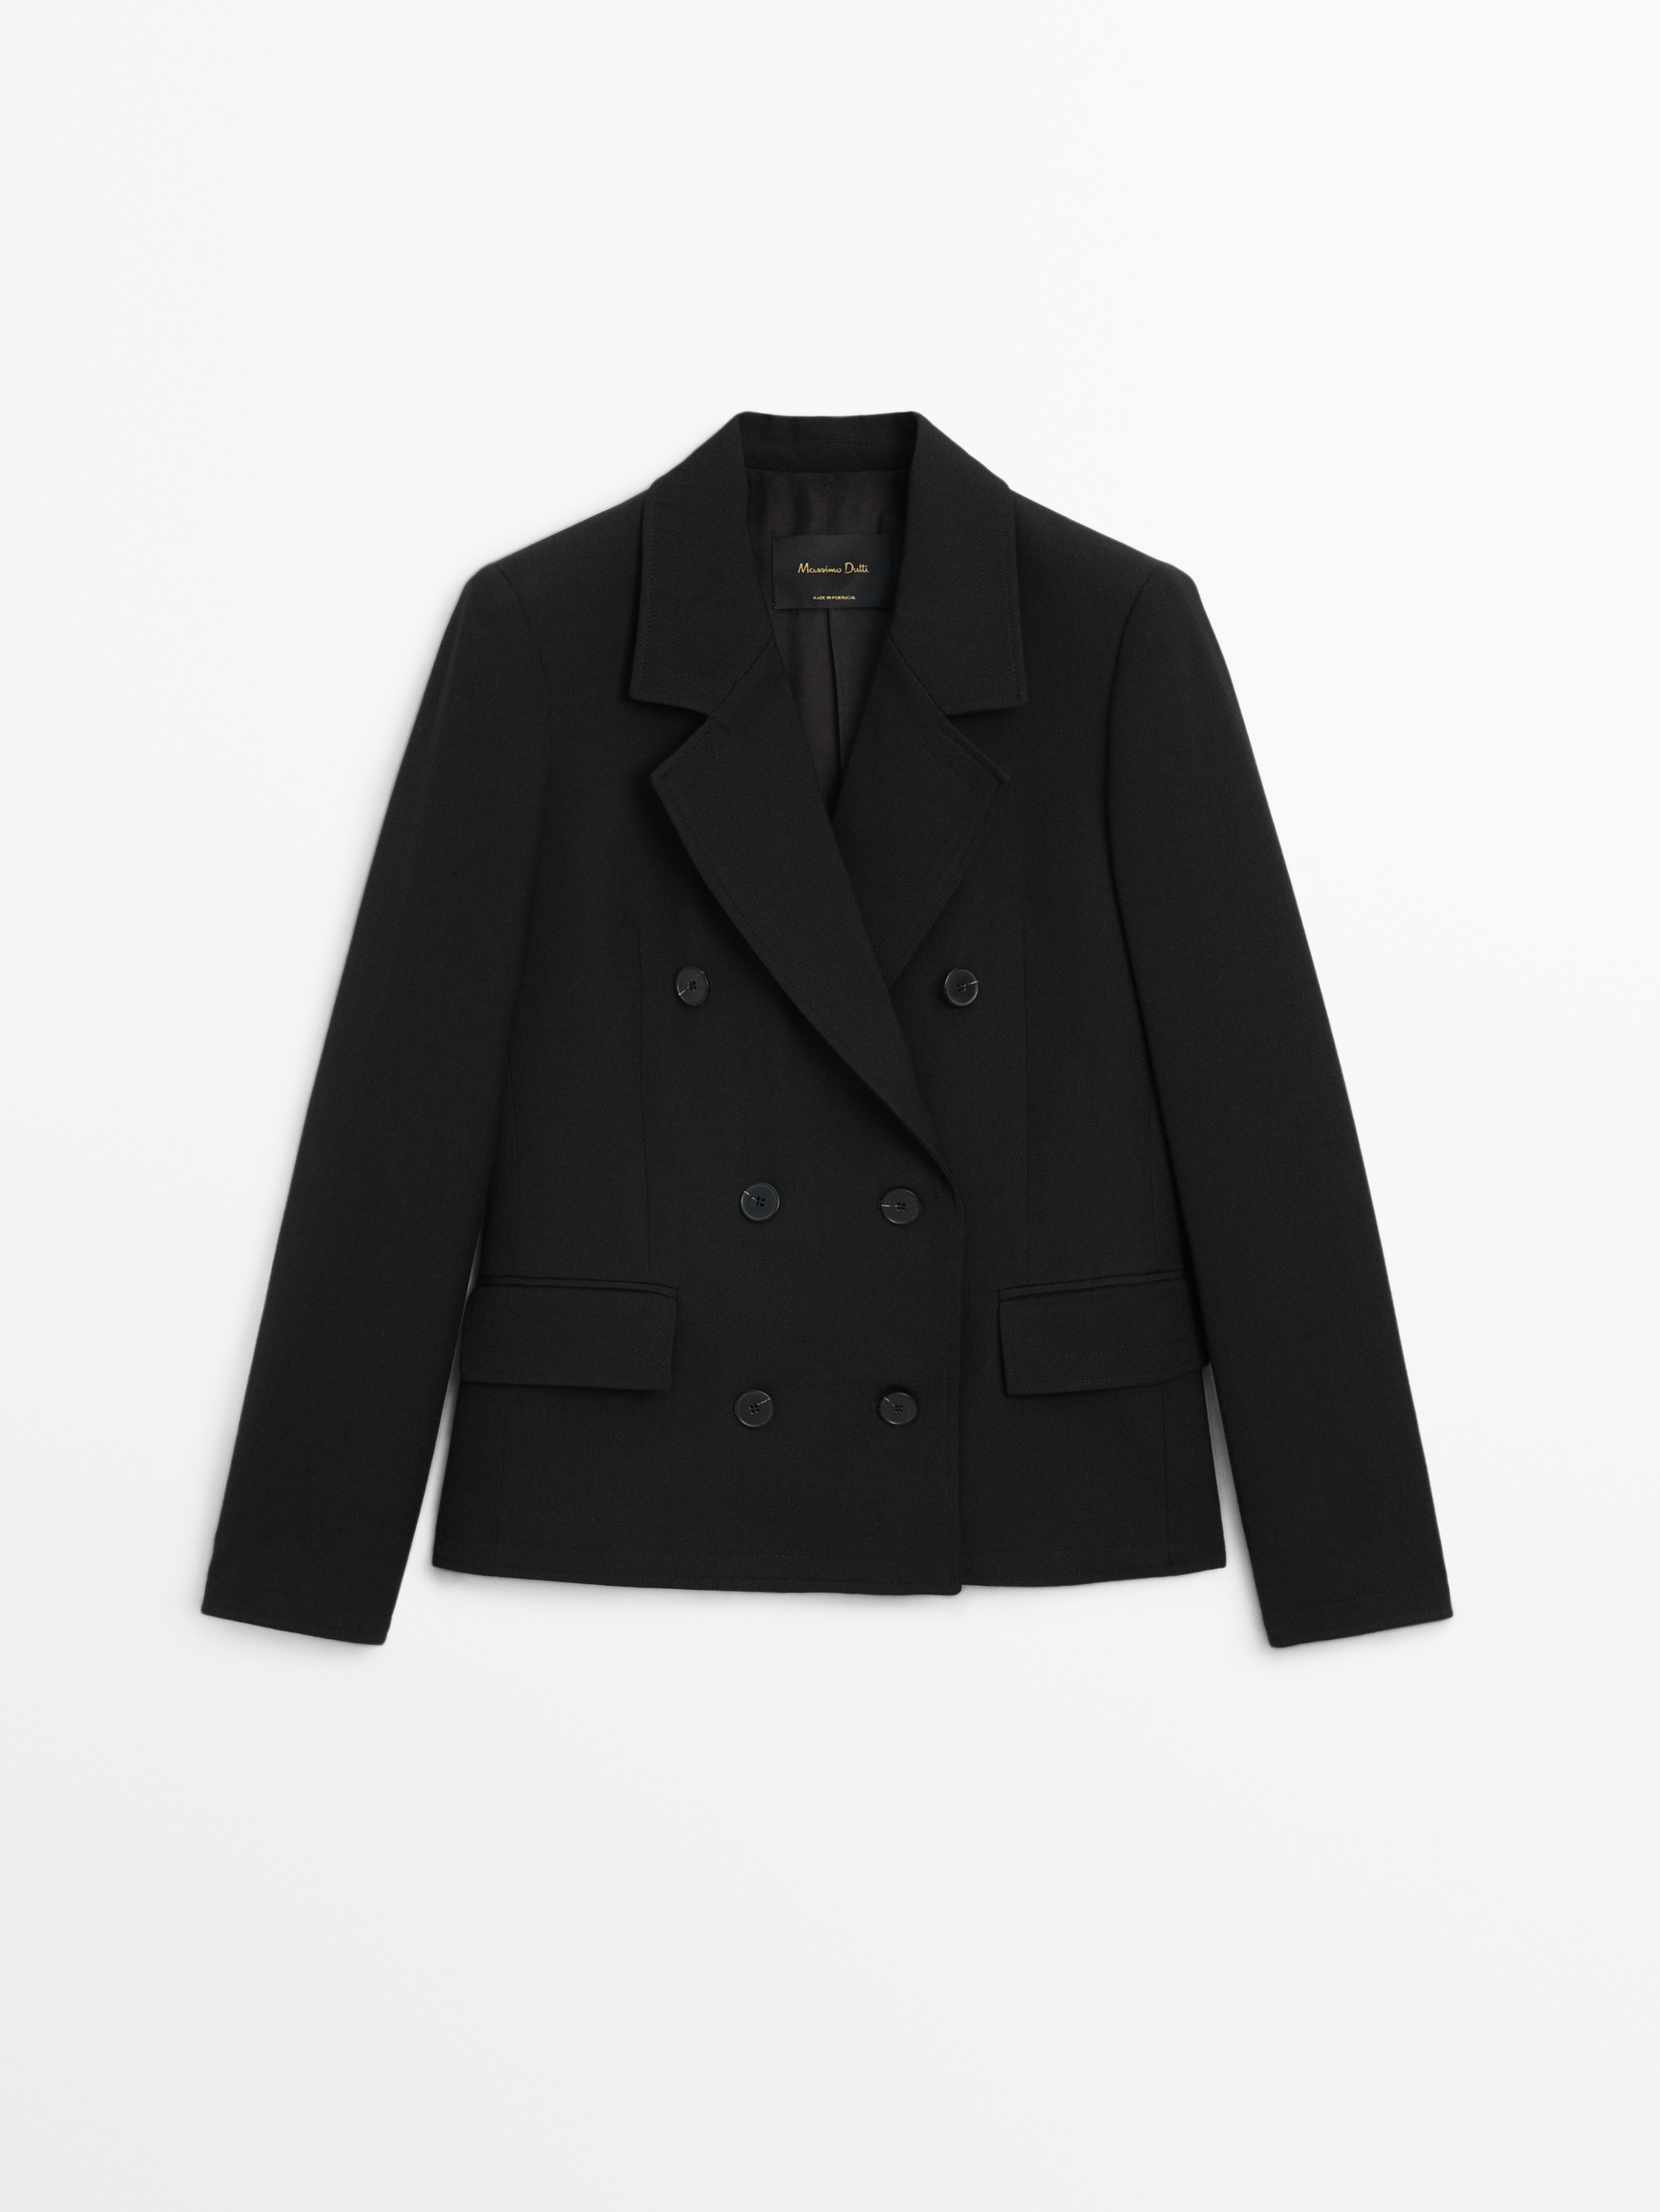 Black double-breasted cropped blazer